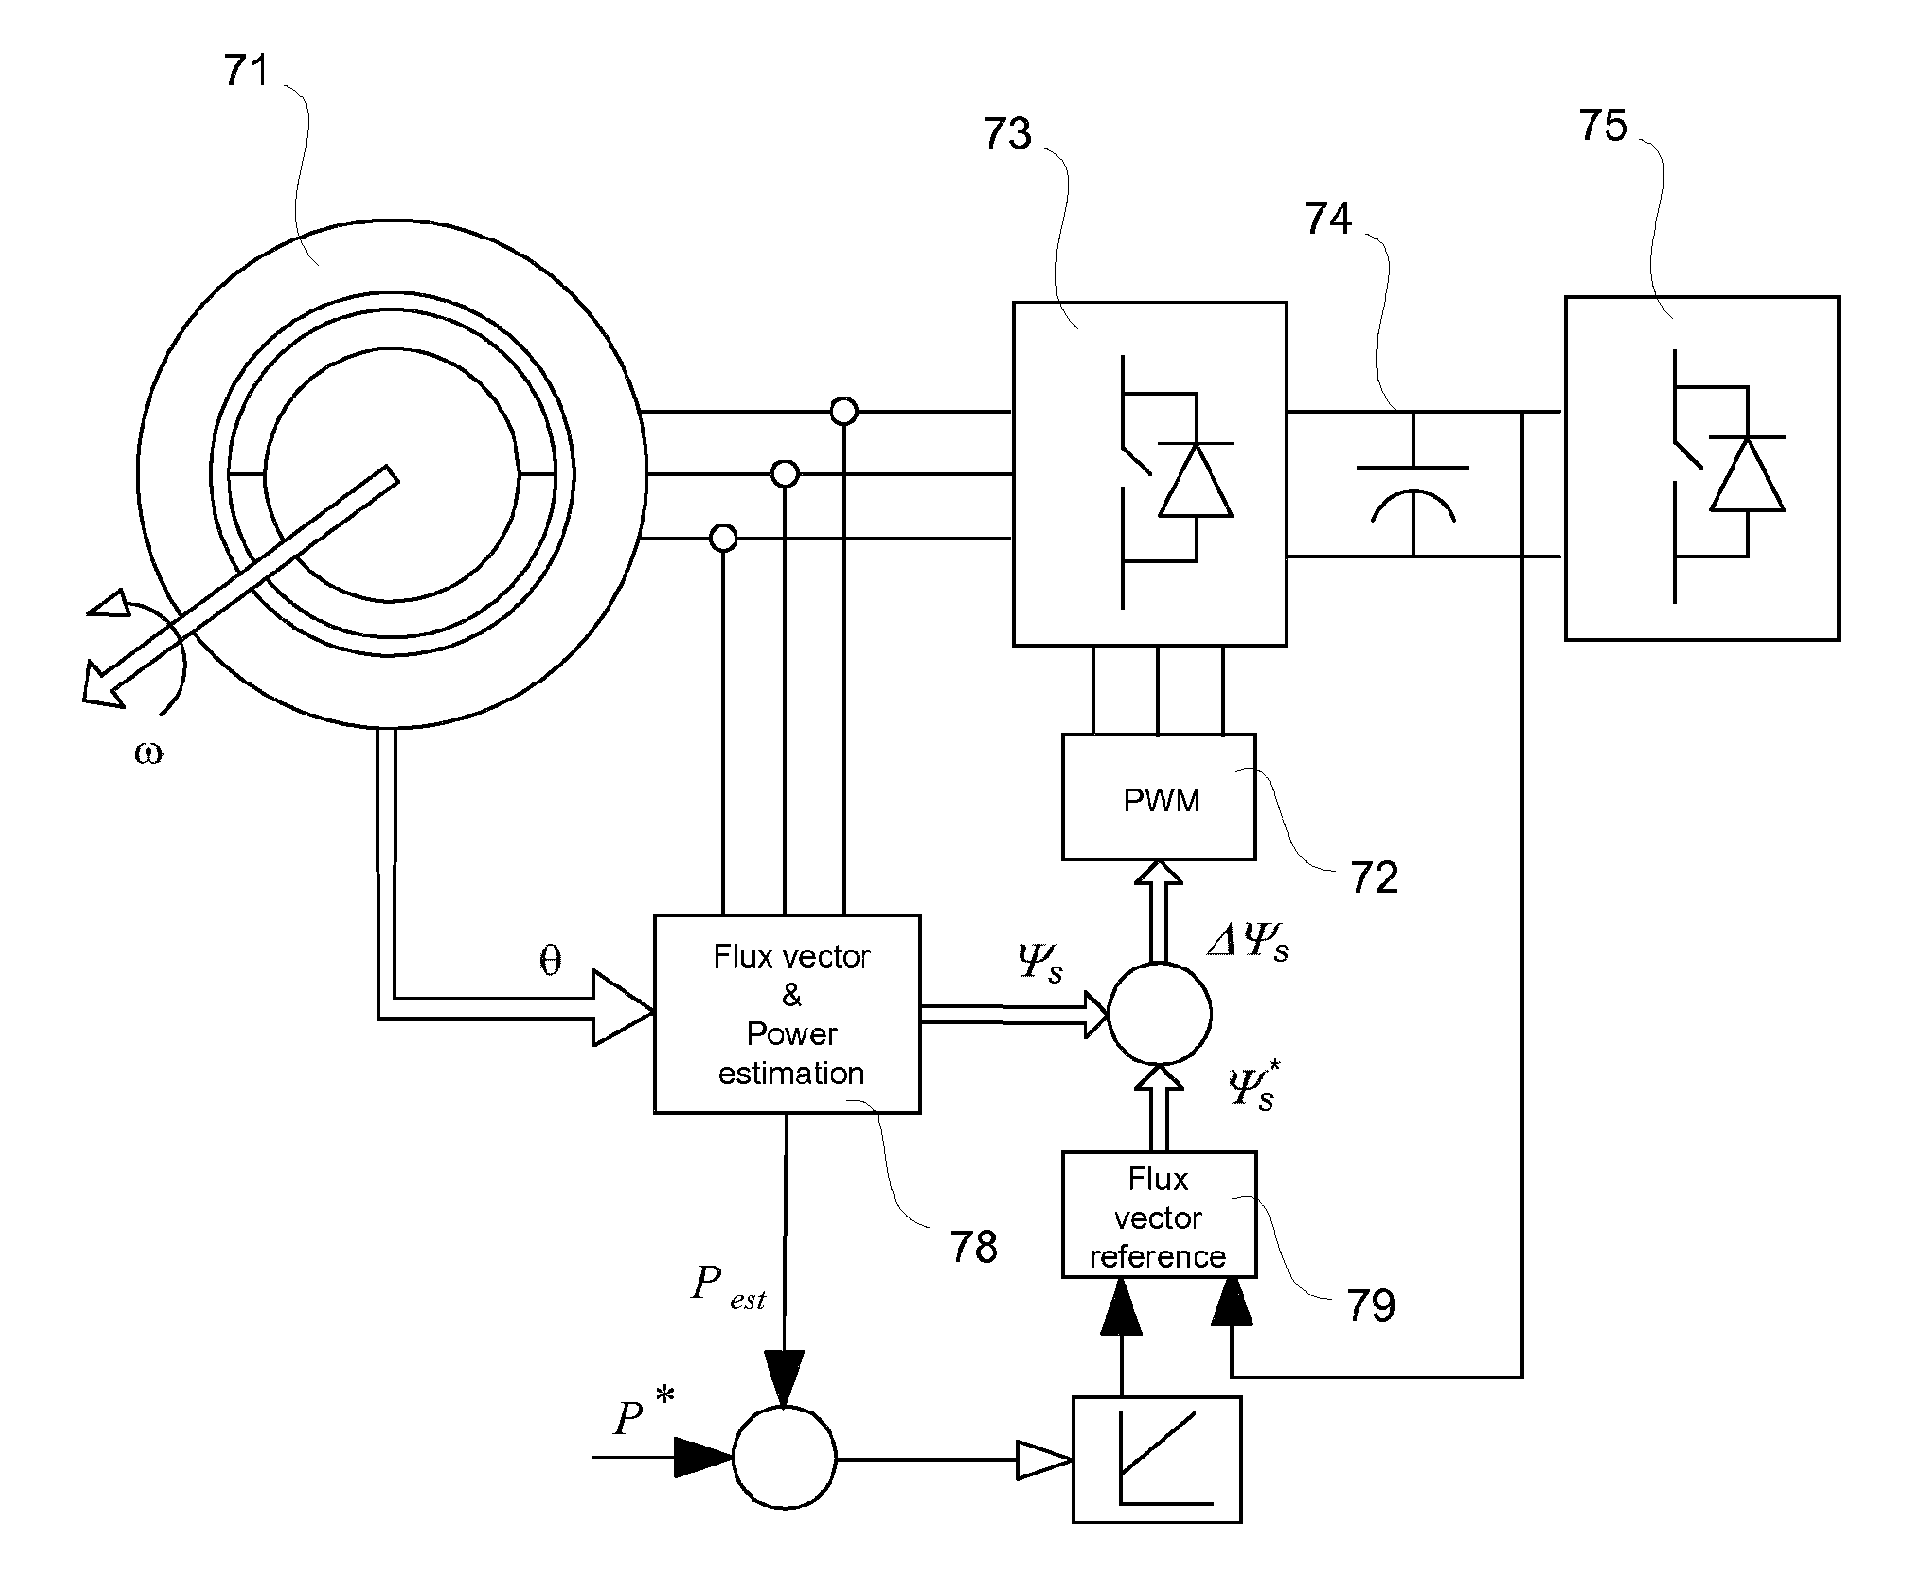 Direct power and stator flux vector control of a generator for wind energy conversion system